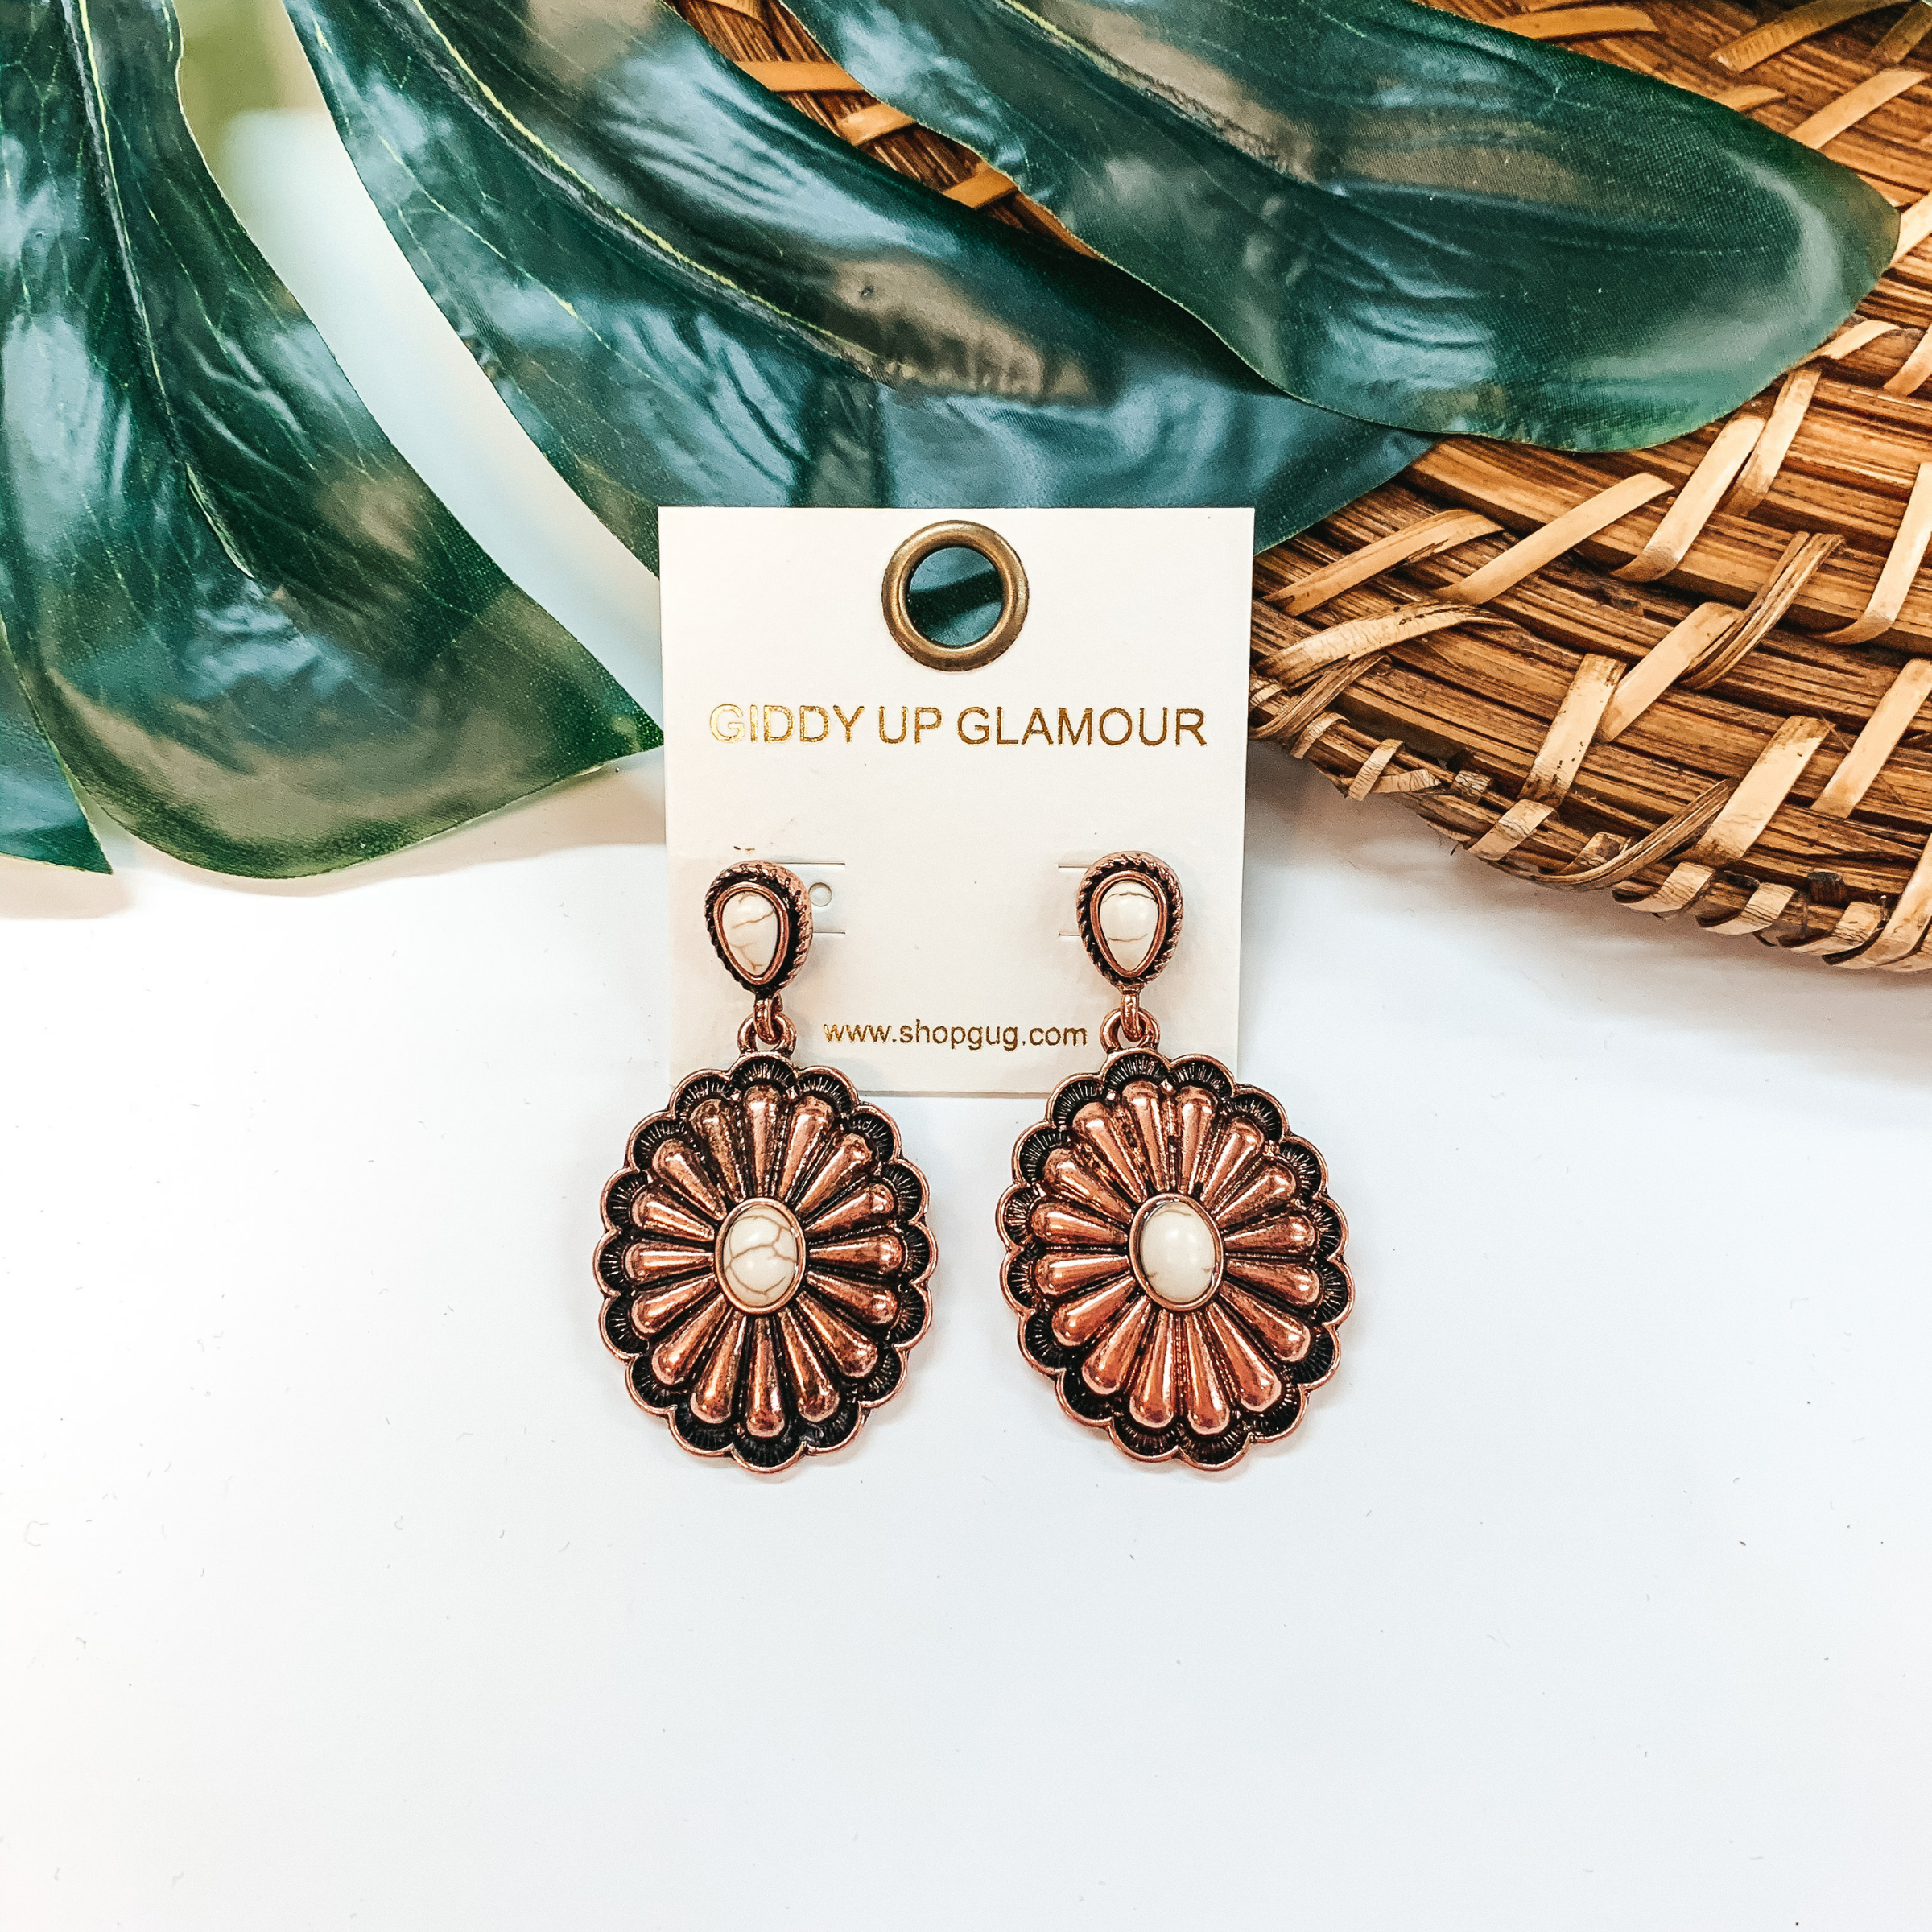 A pair of copper concho earrings with ivory stones. These earrings are pictured on a white background with a basket and palm leaf.